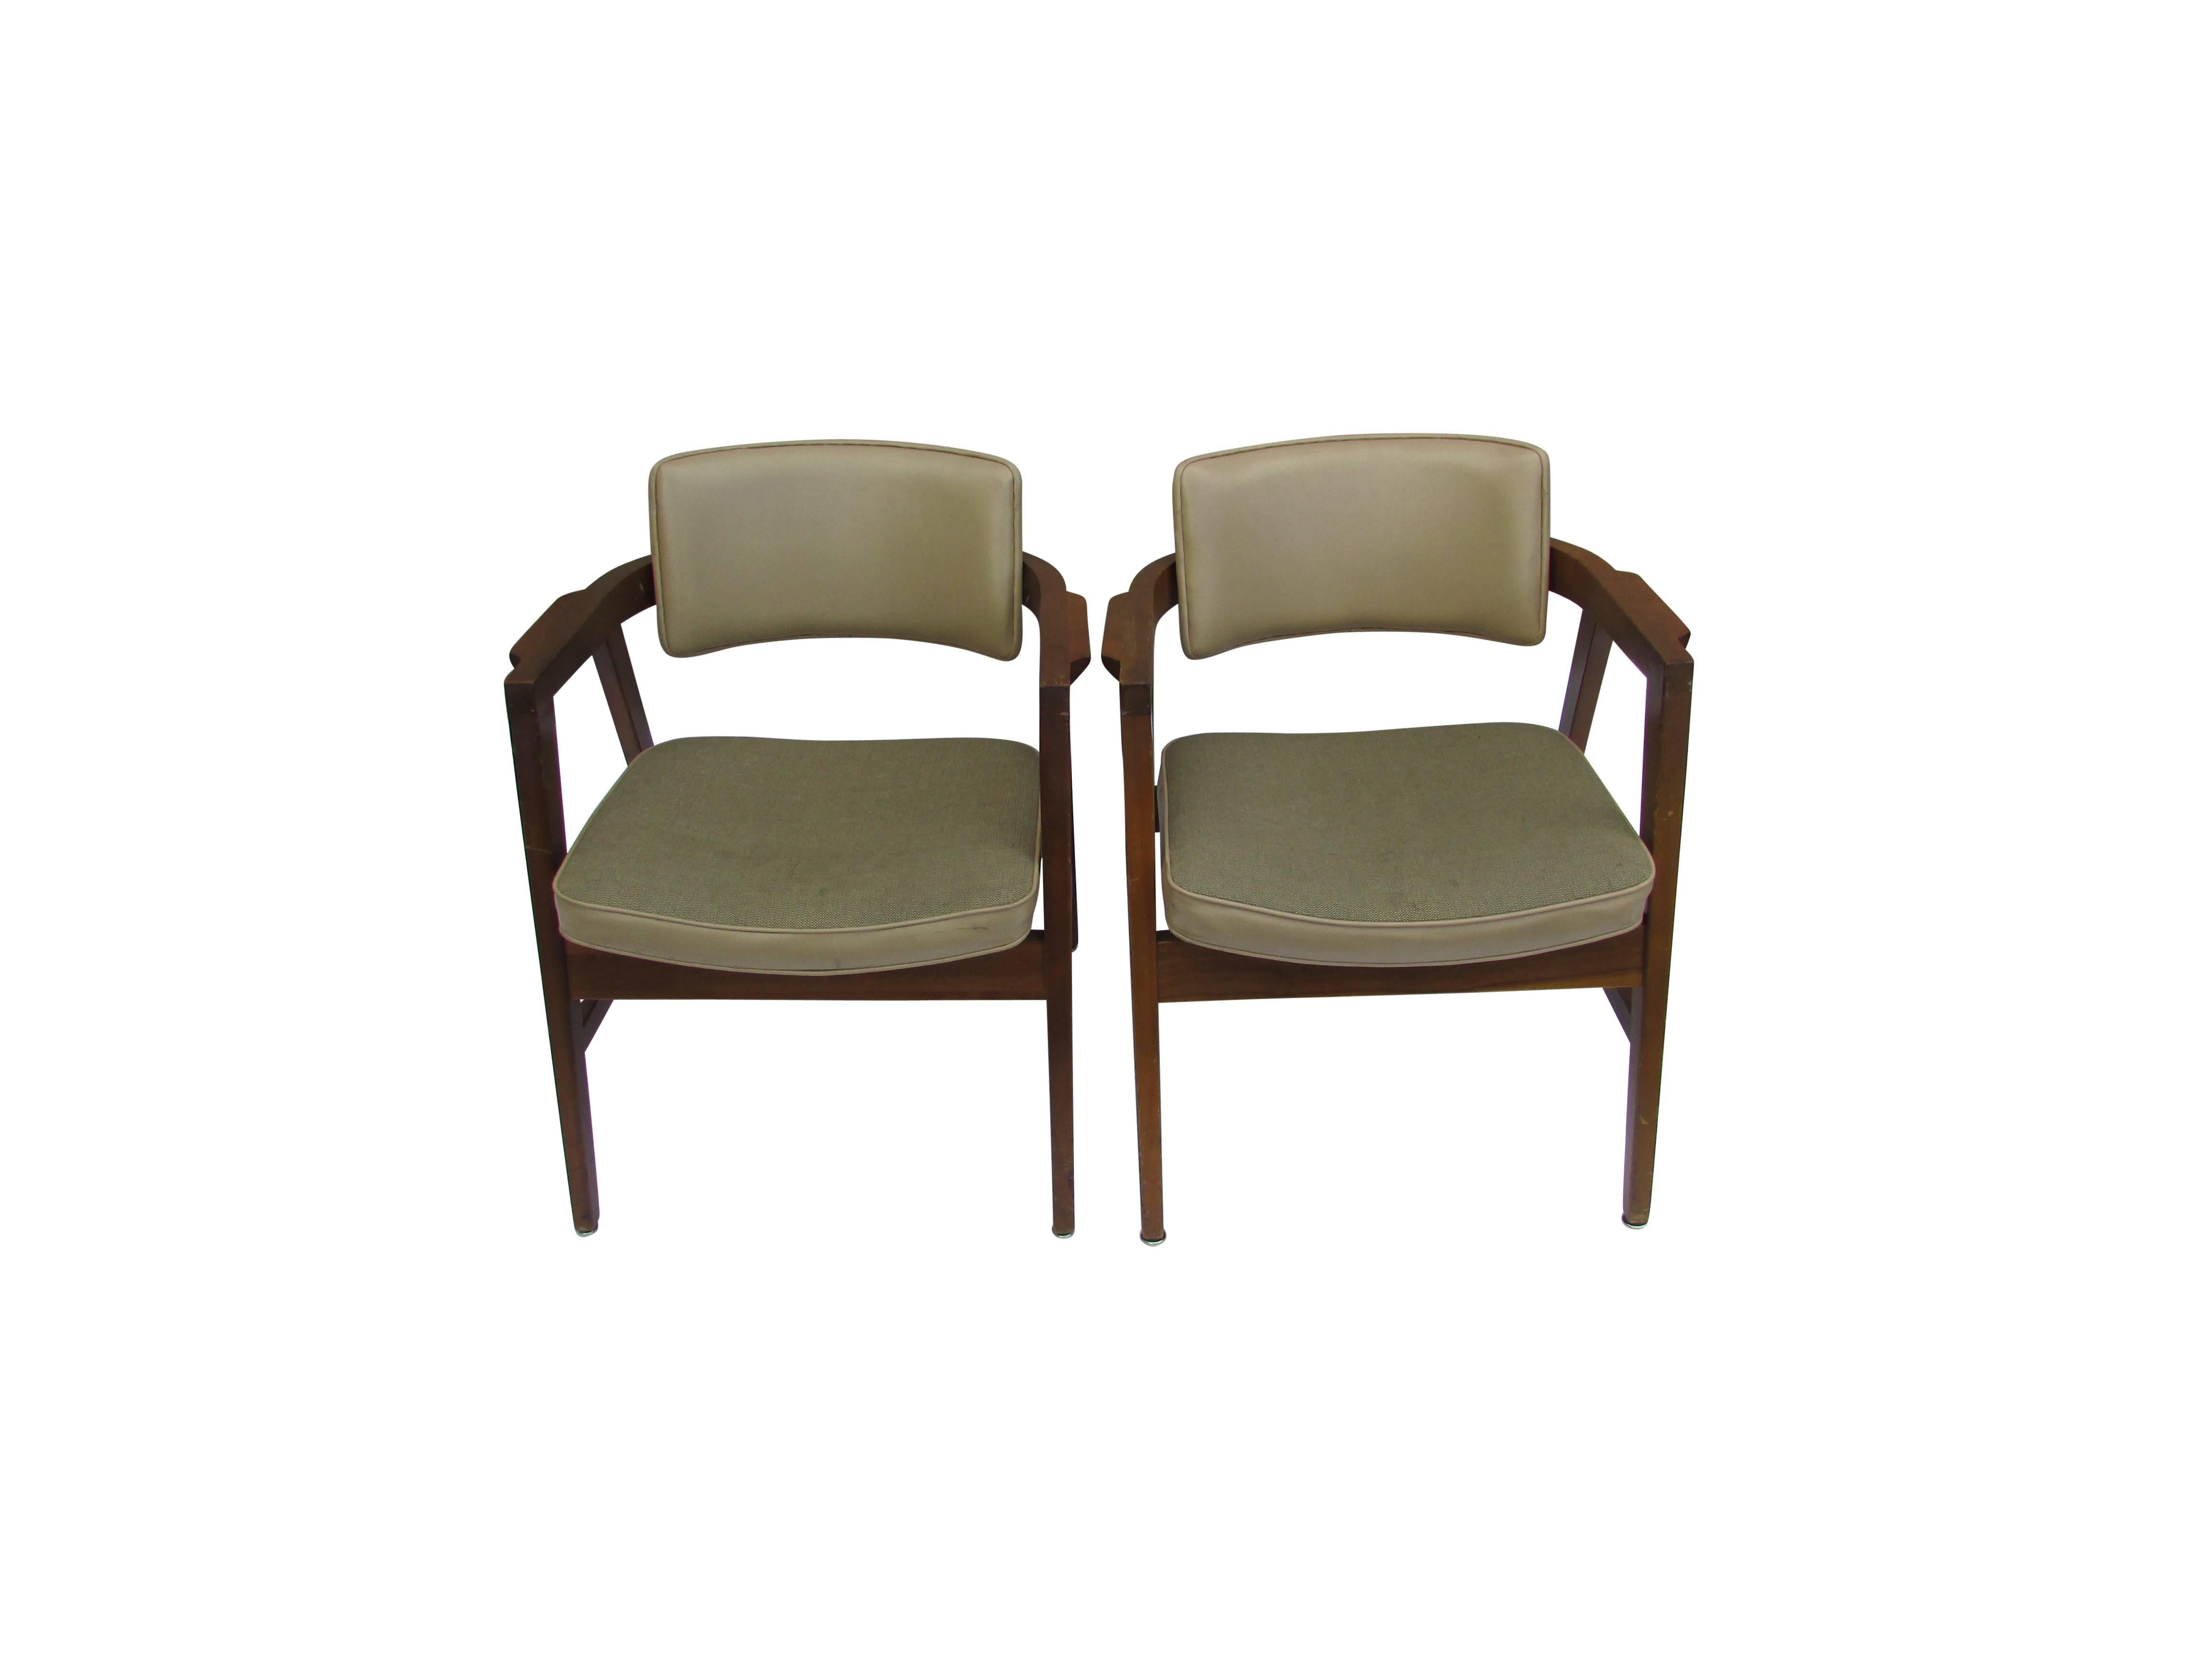 This is a pair of walnut armchairs with great lines by The Gunlocke Company, Inc. On the underside of the seat, the original manufacturers labels are still intact. On the back side of the either chair is a US Department of Labor label. Upholstery is